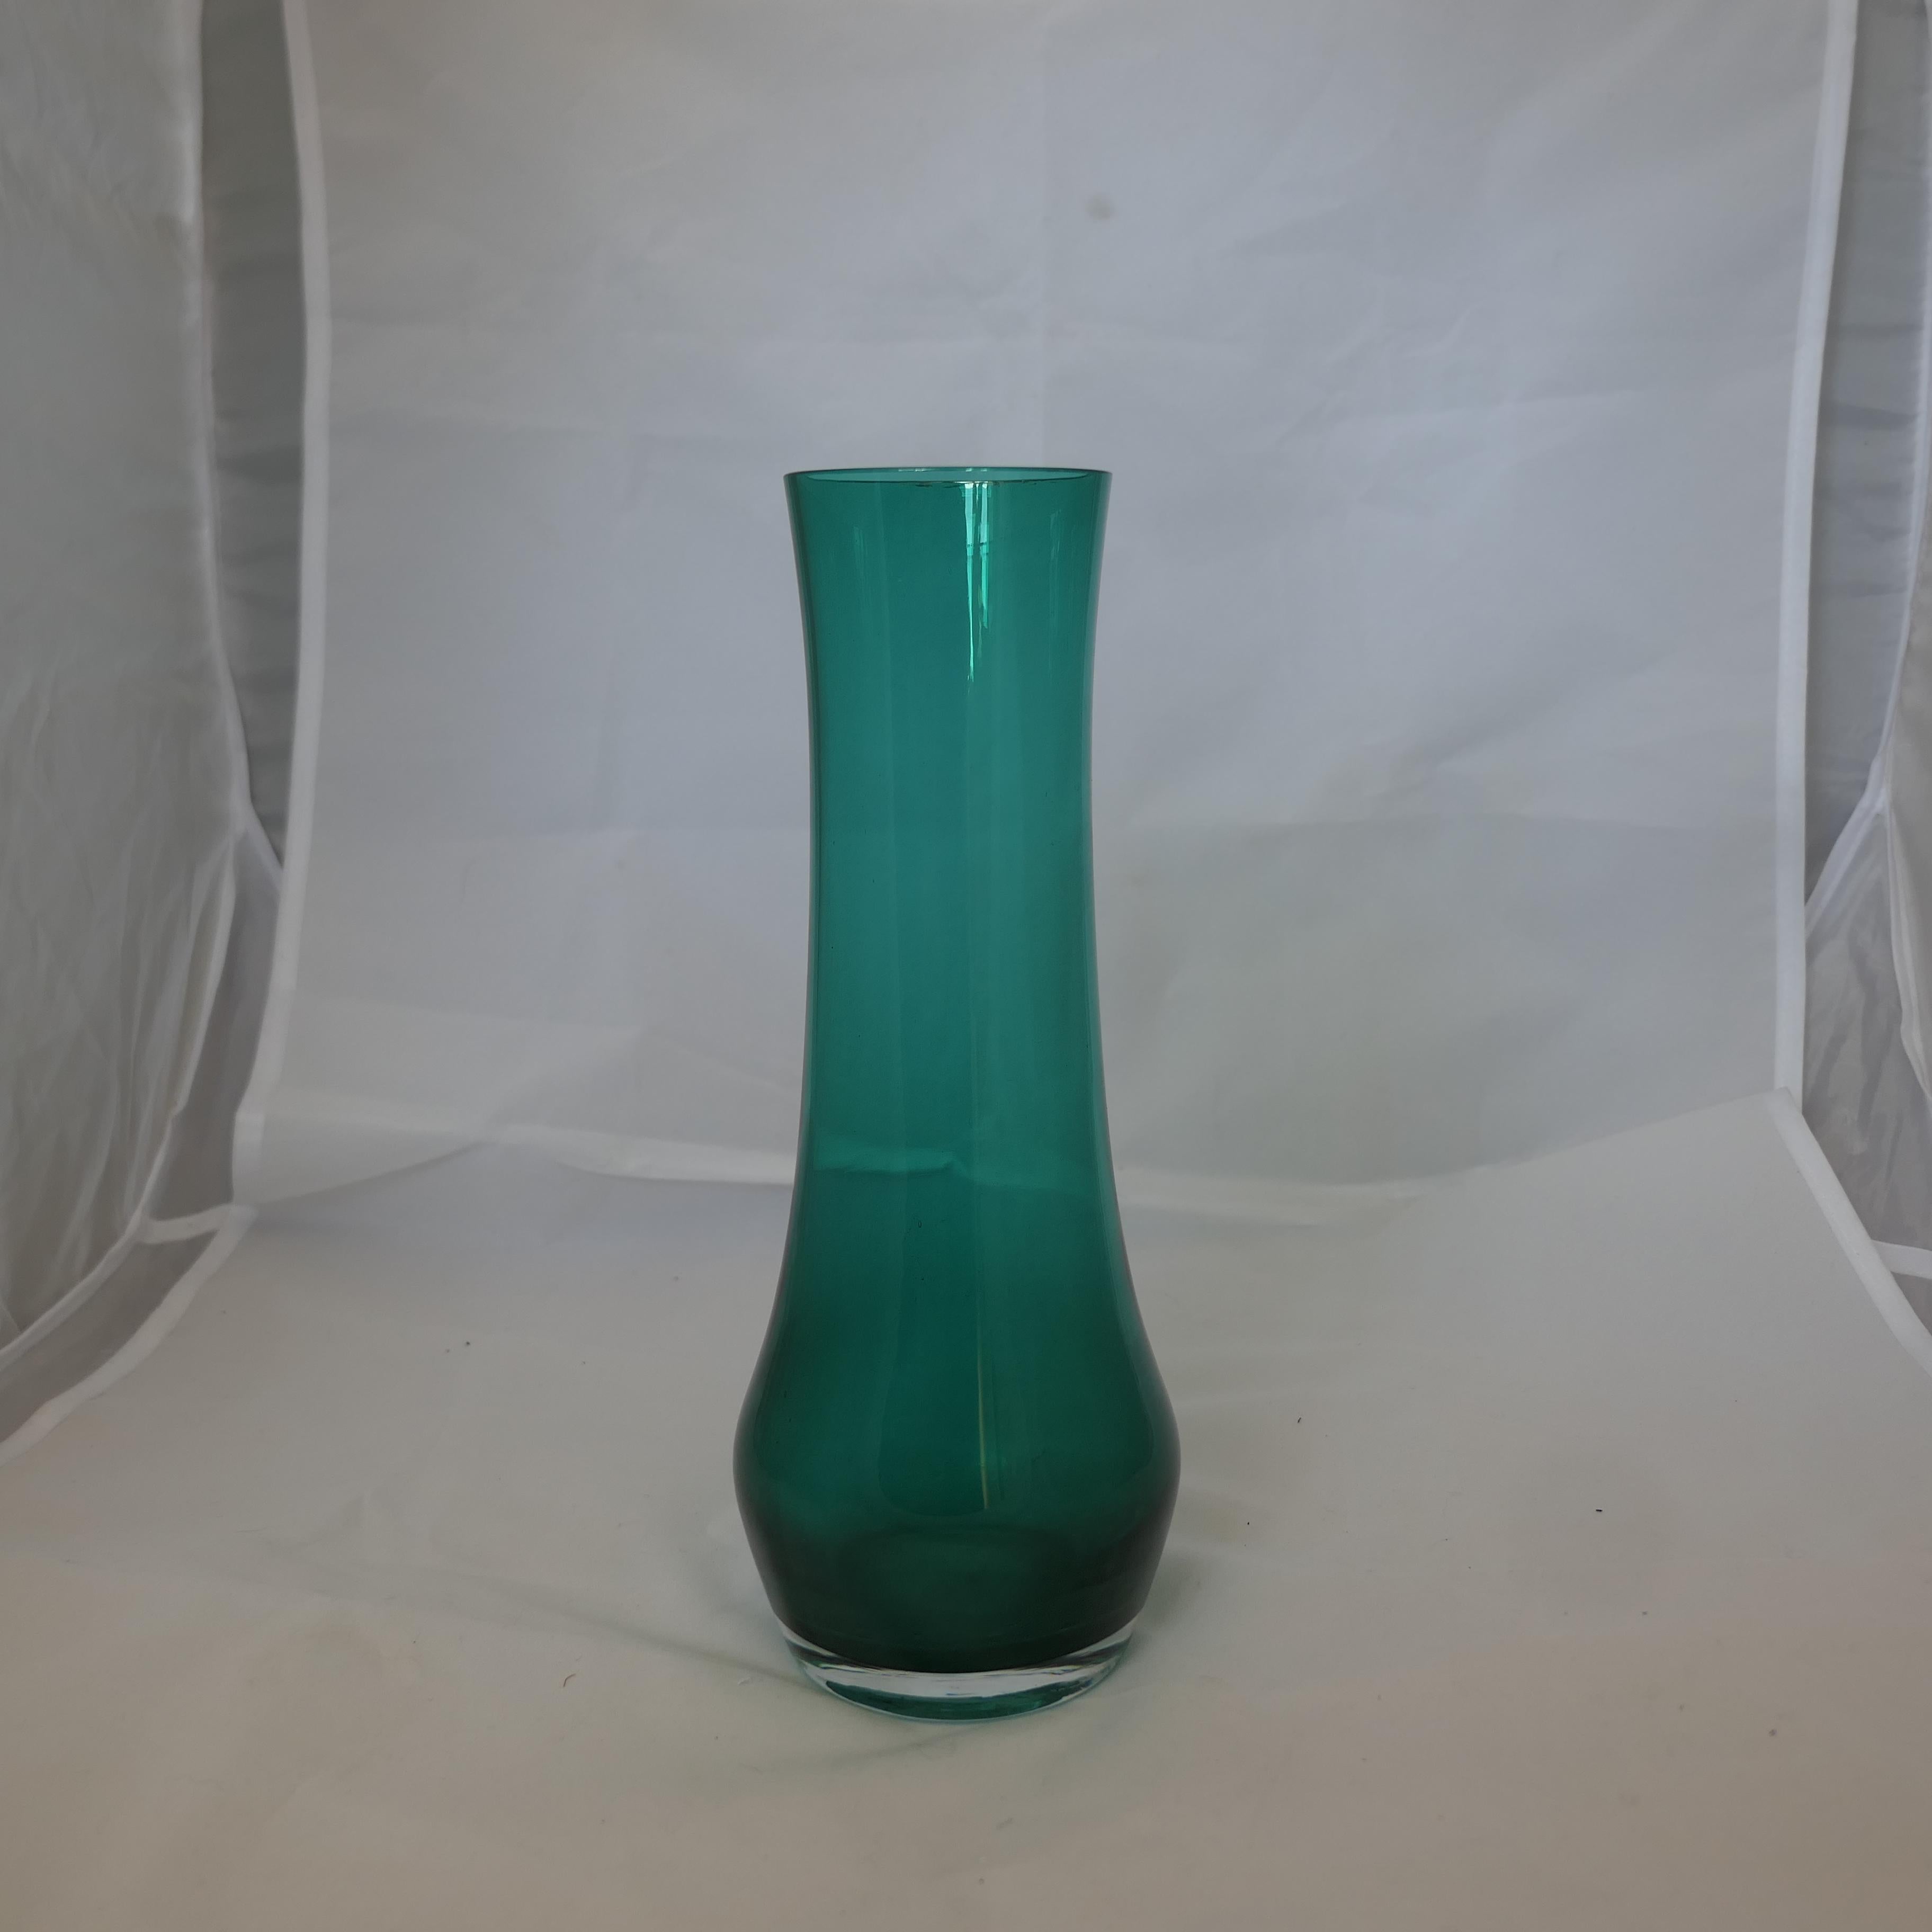 1960s Green Glass Vase by Tamara Aladin for Riihimäen Lasi Oy



A fine hand blown piece from Finland beautiful in both shape and colour, no chips 0r cracks
10” tall and 4” in diameter
FB207